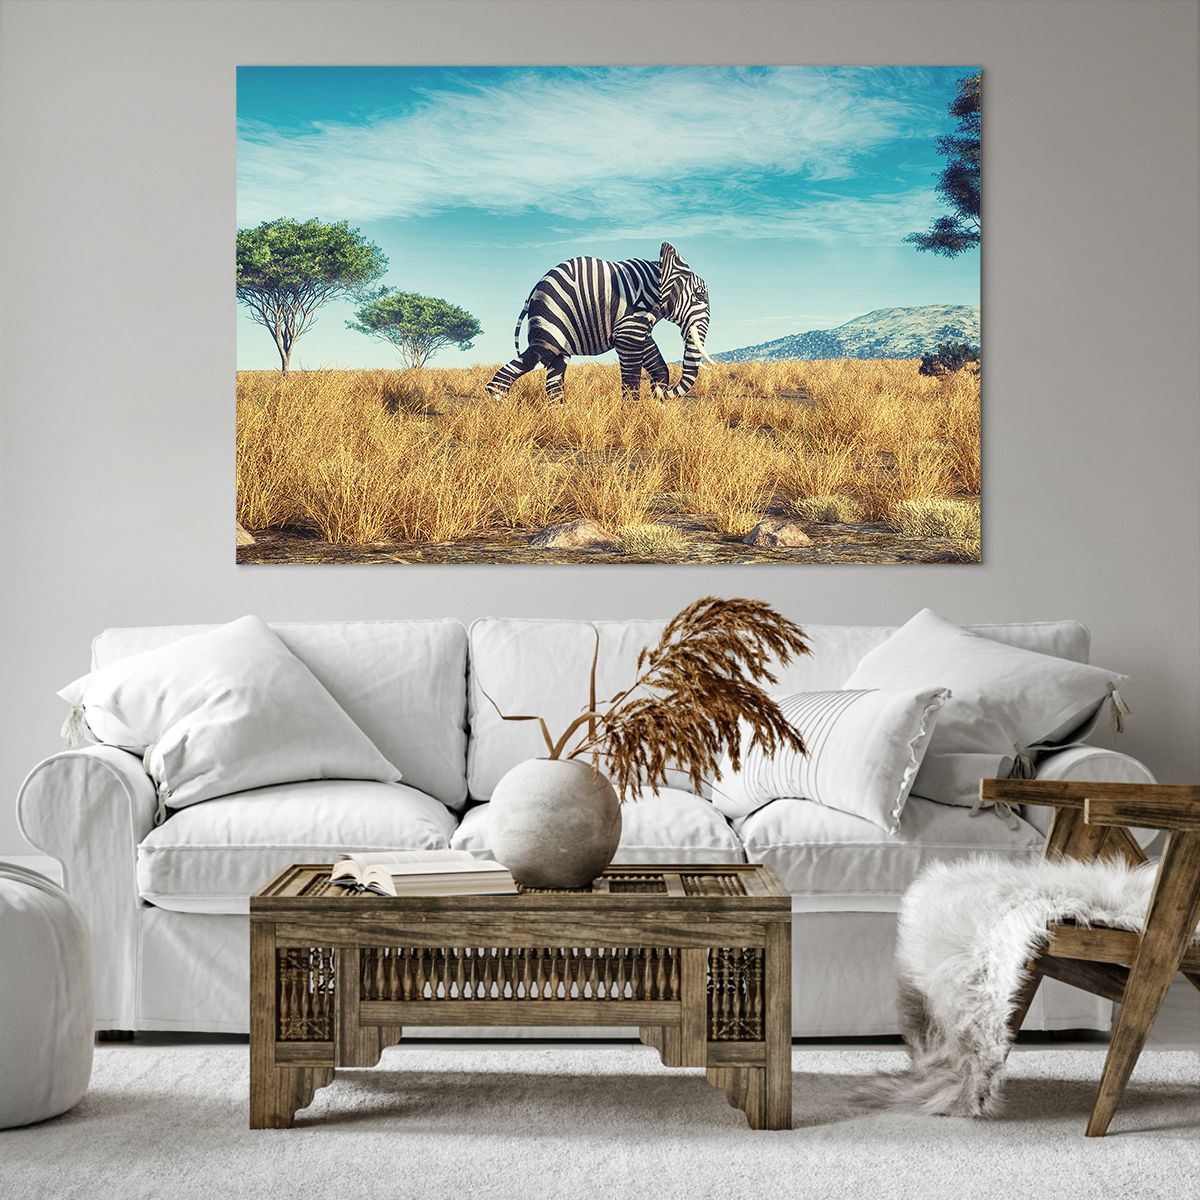 Canvas picture Abstraction, Canvas picture Elephant, Canvas picture Ribs, Canvas picture Landscape, Canvas picture Africa